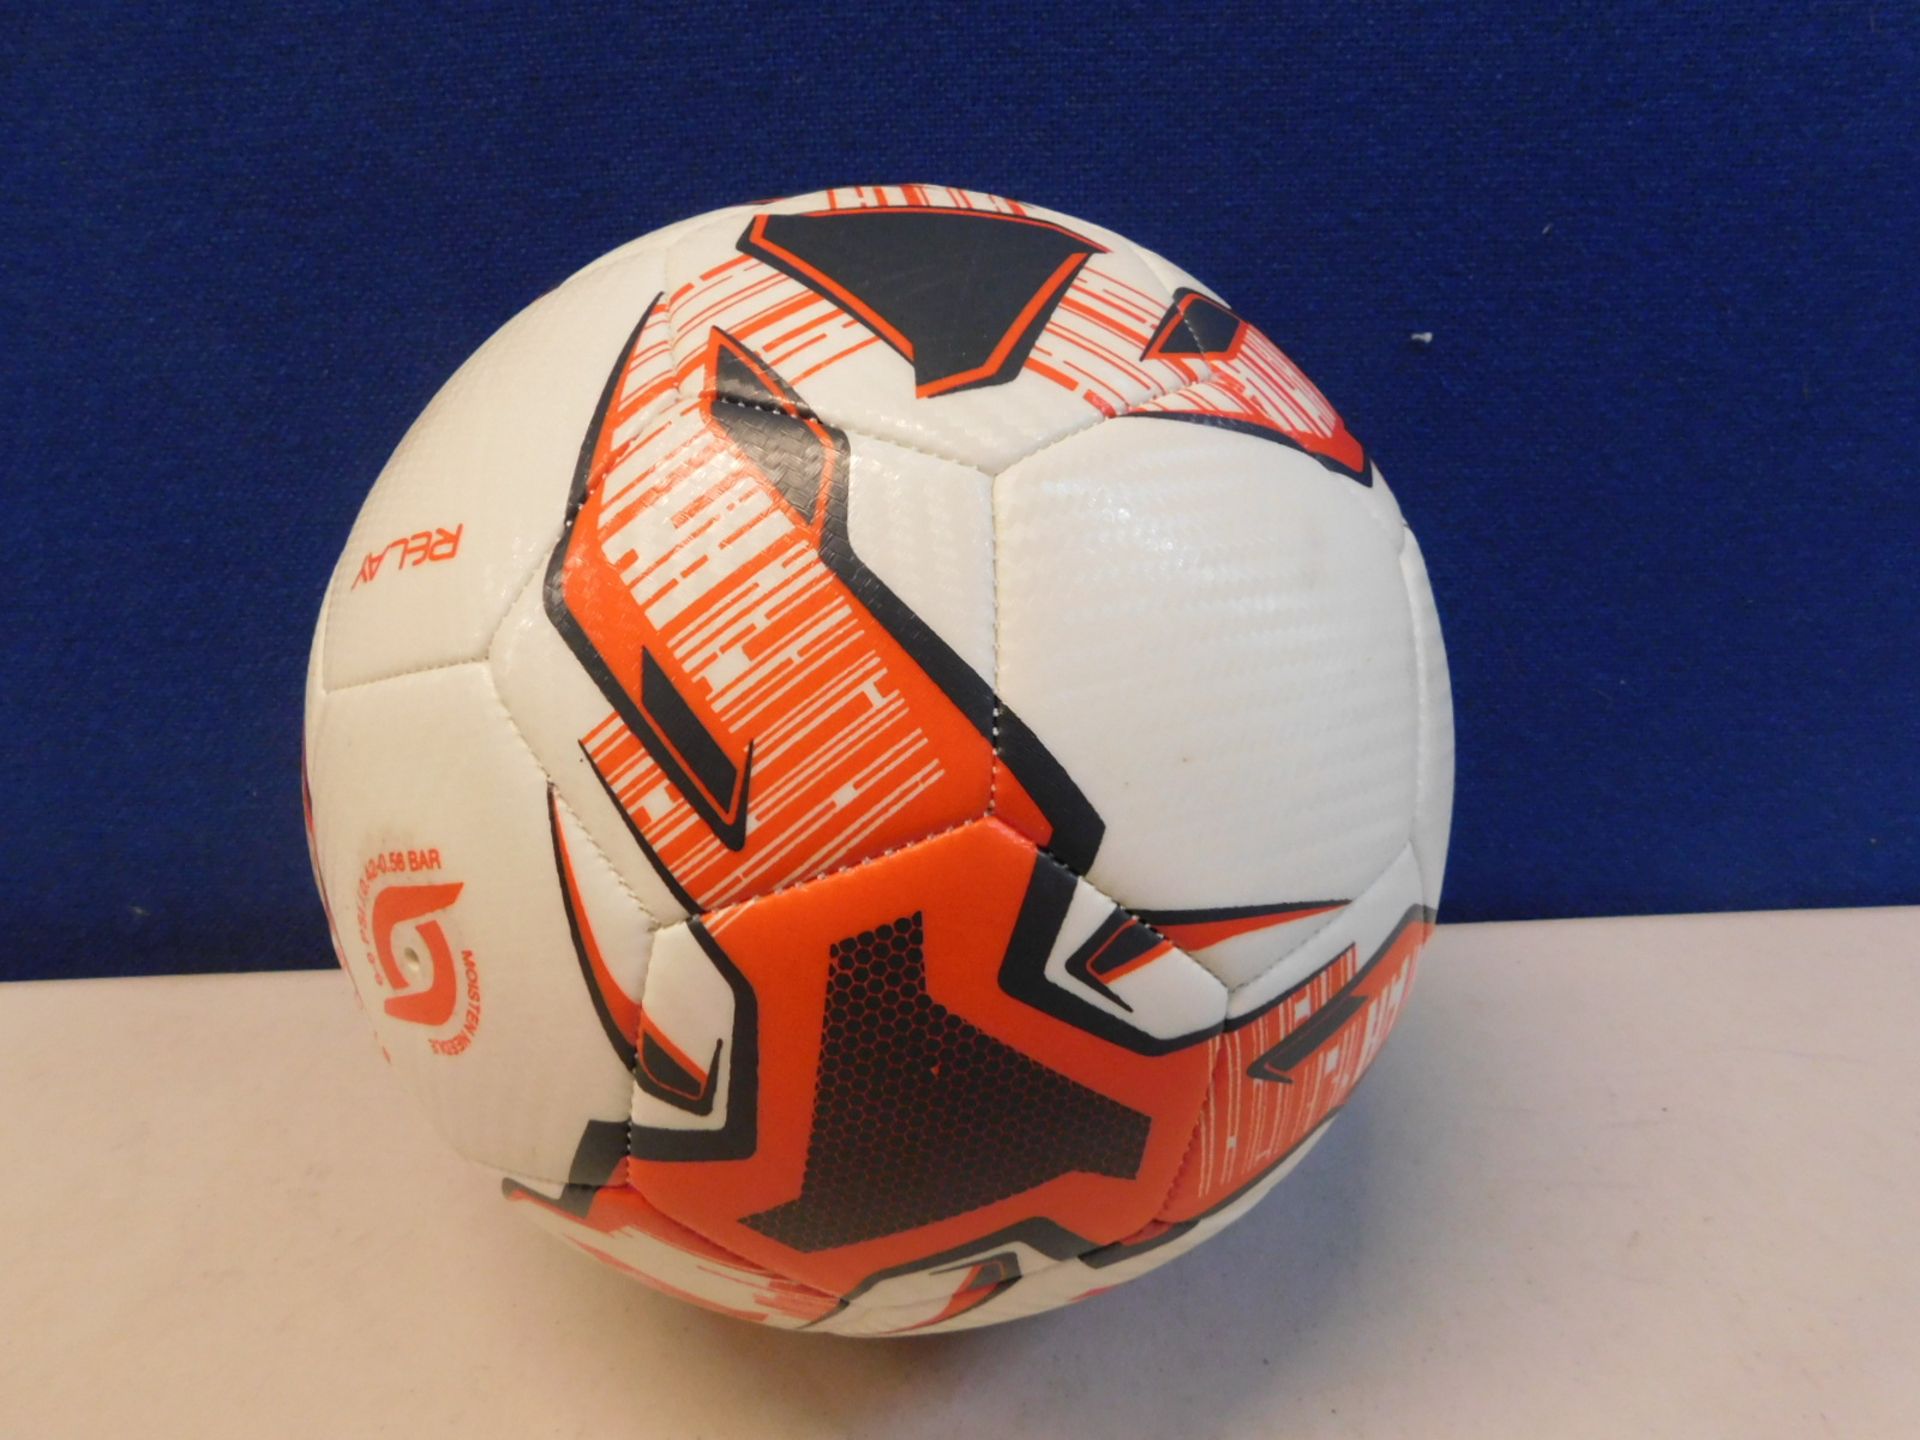 1 MITRE SIZE 5 RELAY TRAINING FOOTBALL RRP £24.99